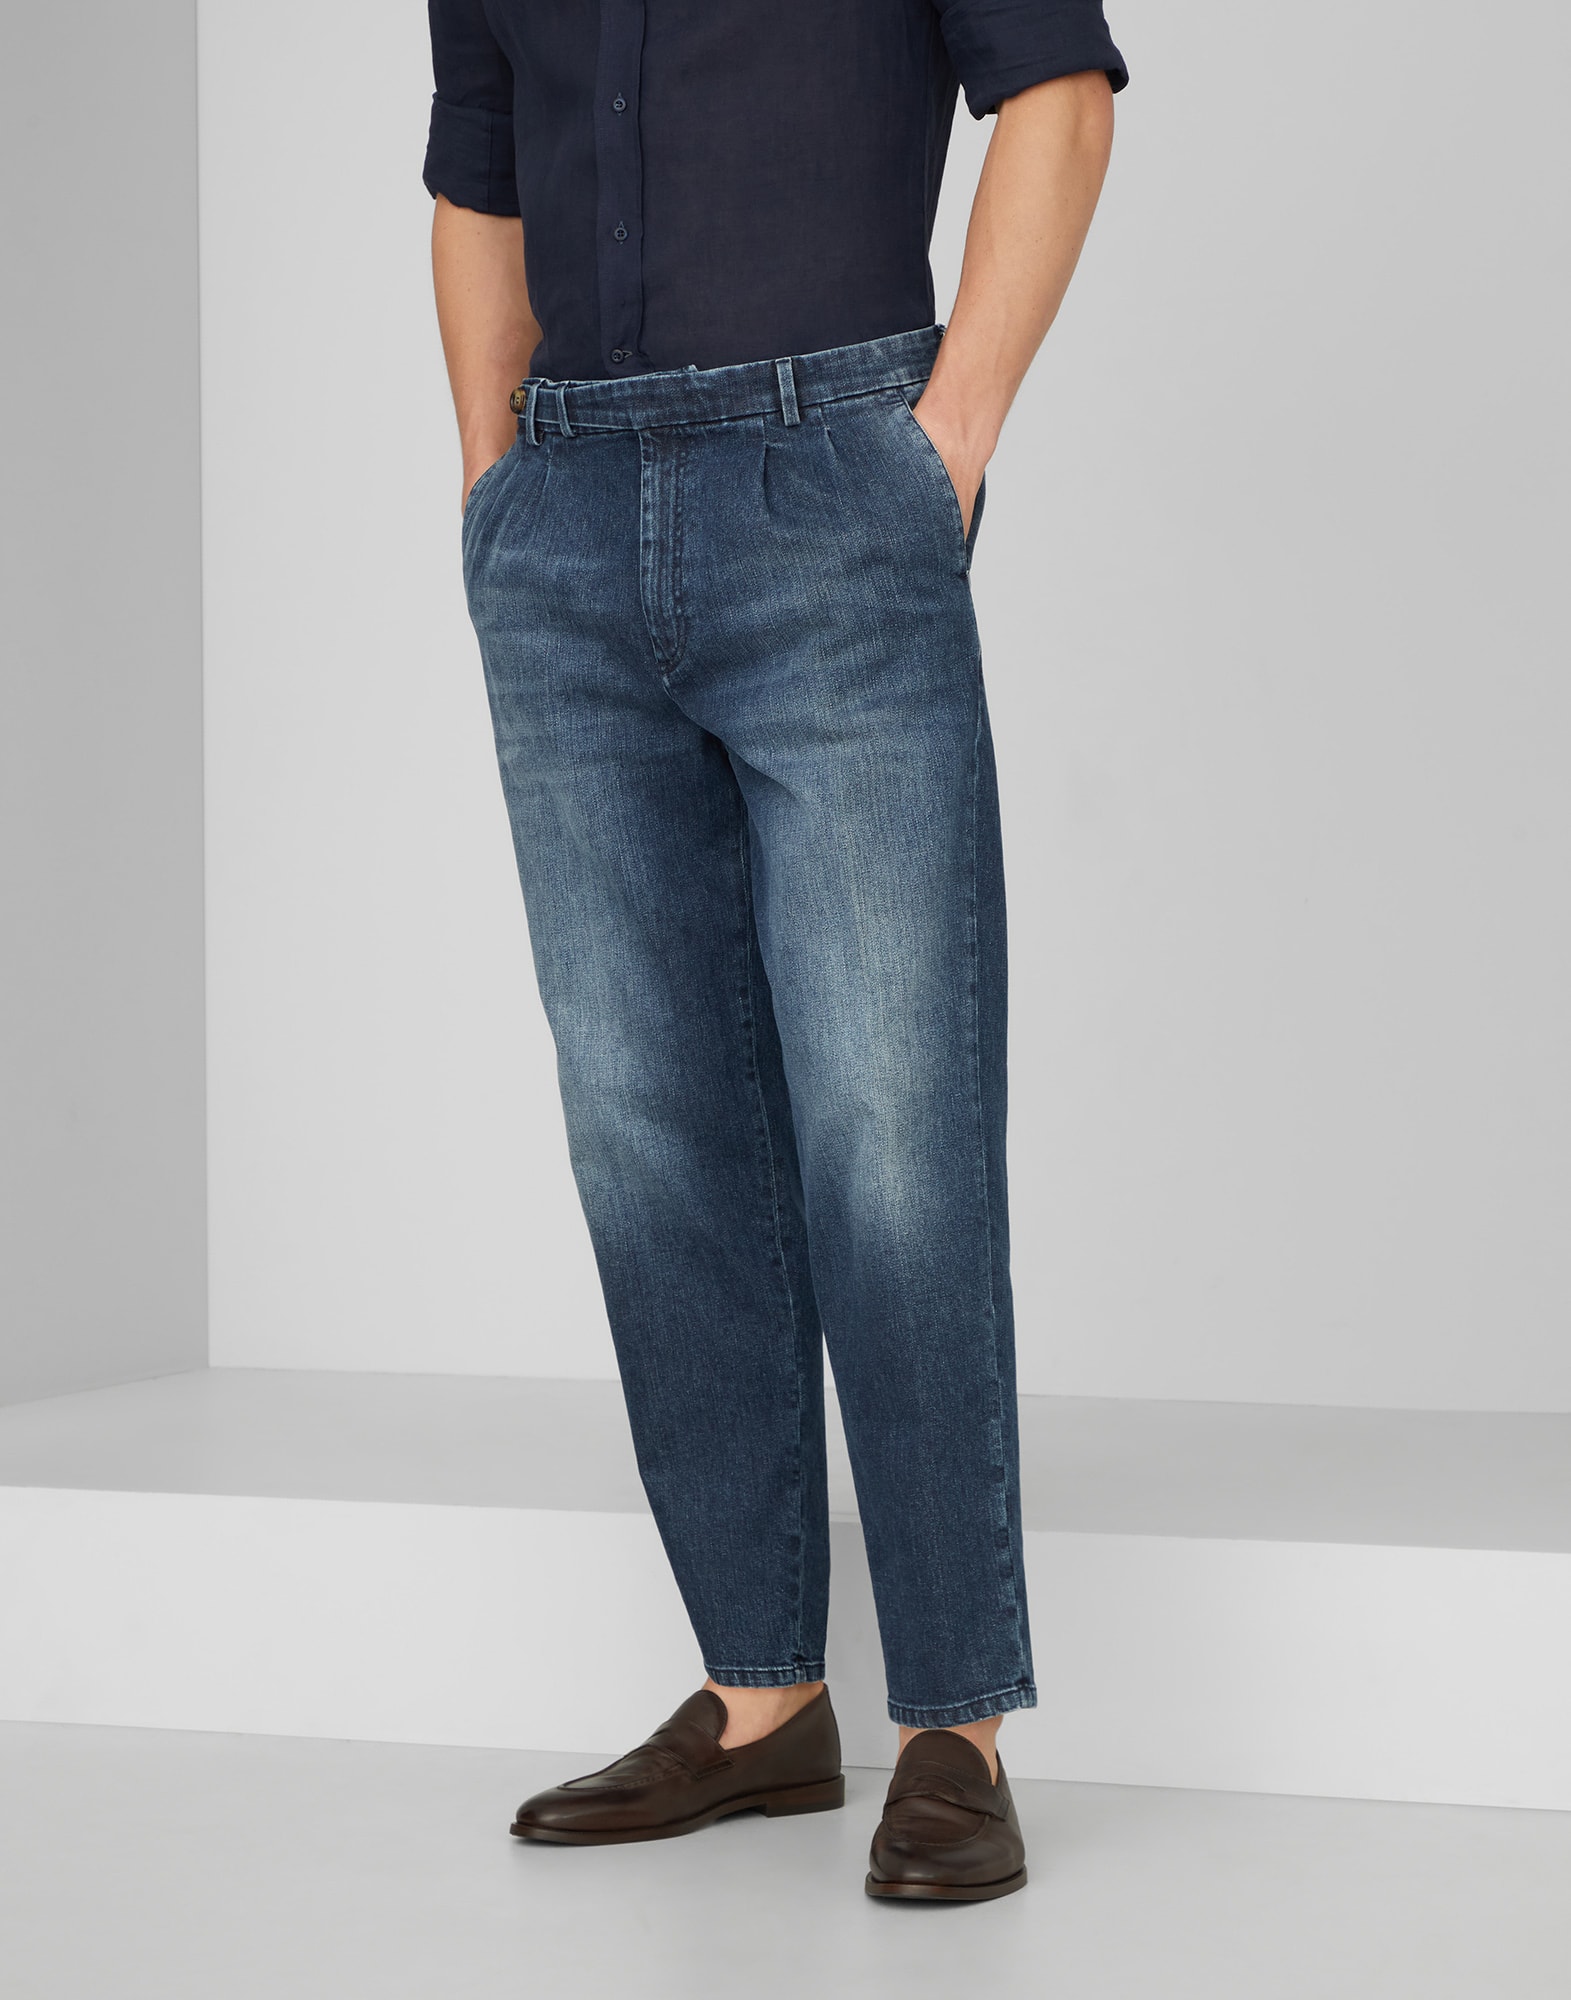 Denim Trousers with Details - Front view